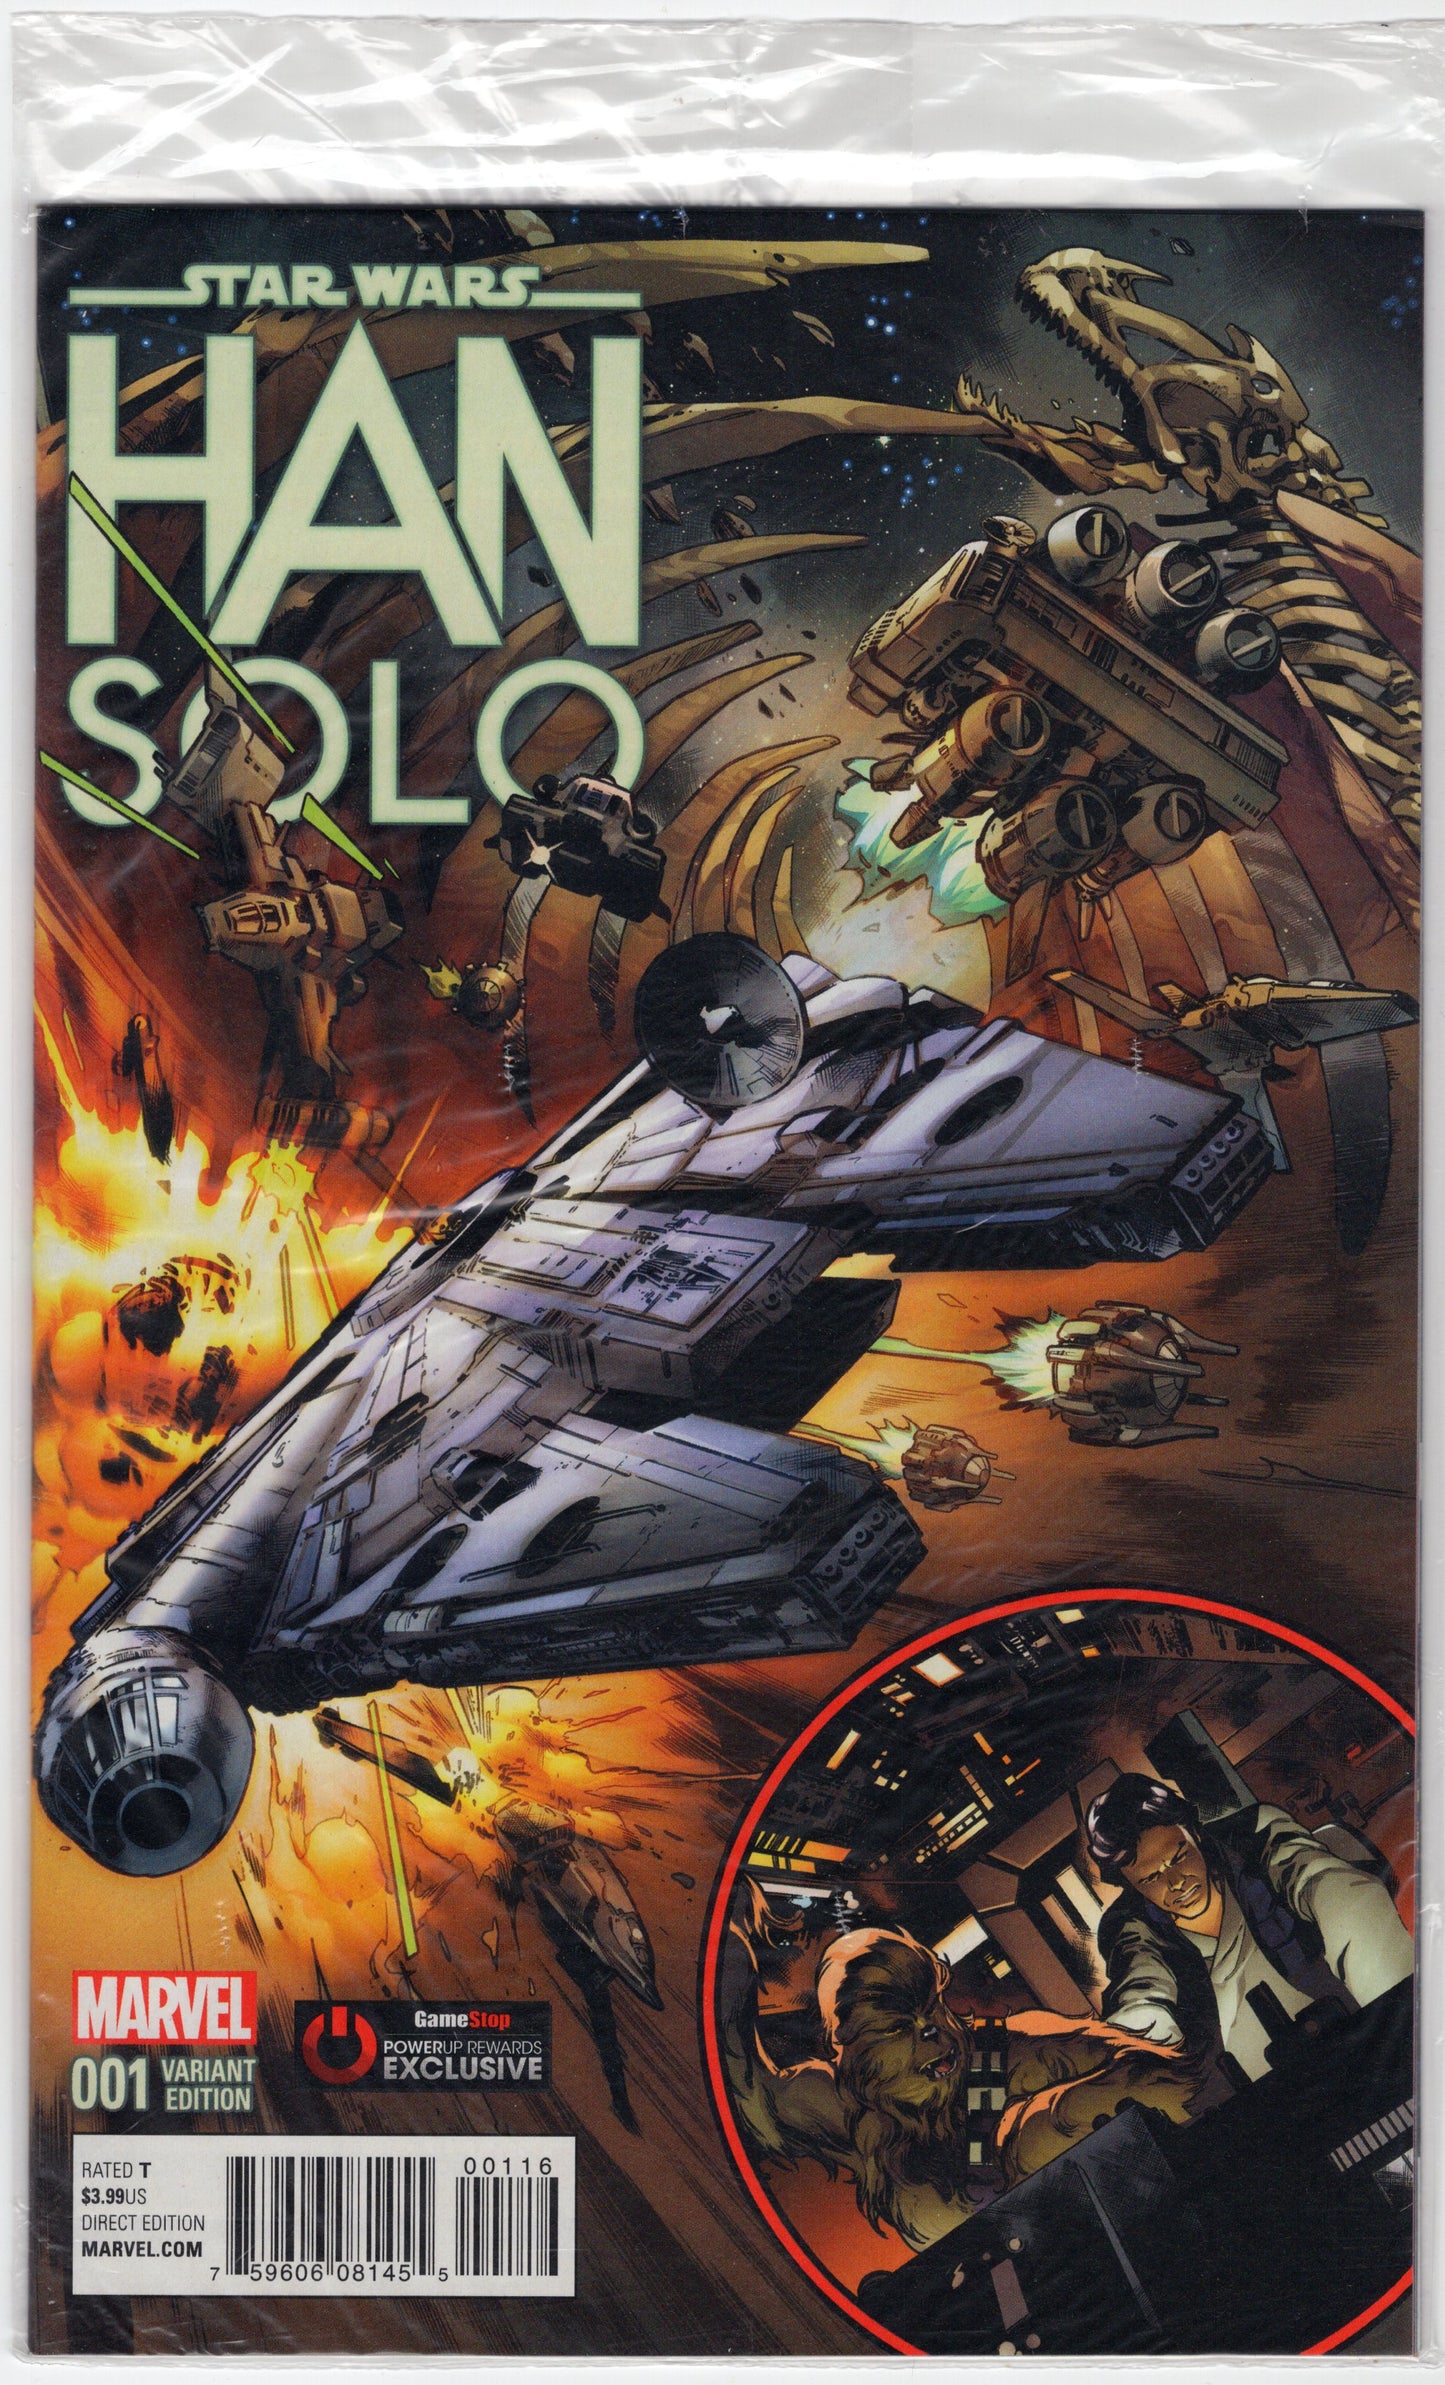 Han Solo - Star Wars - Issue #1 "Gamestop Exc., LE to 3000 Copies" SEALED POLYBAG! (June, 2015 - Marvel Comics) NM+